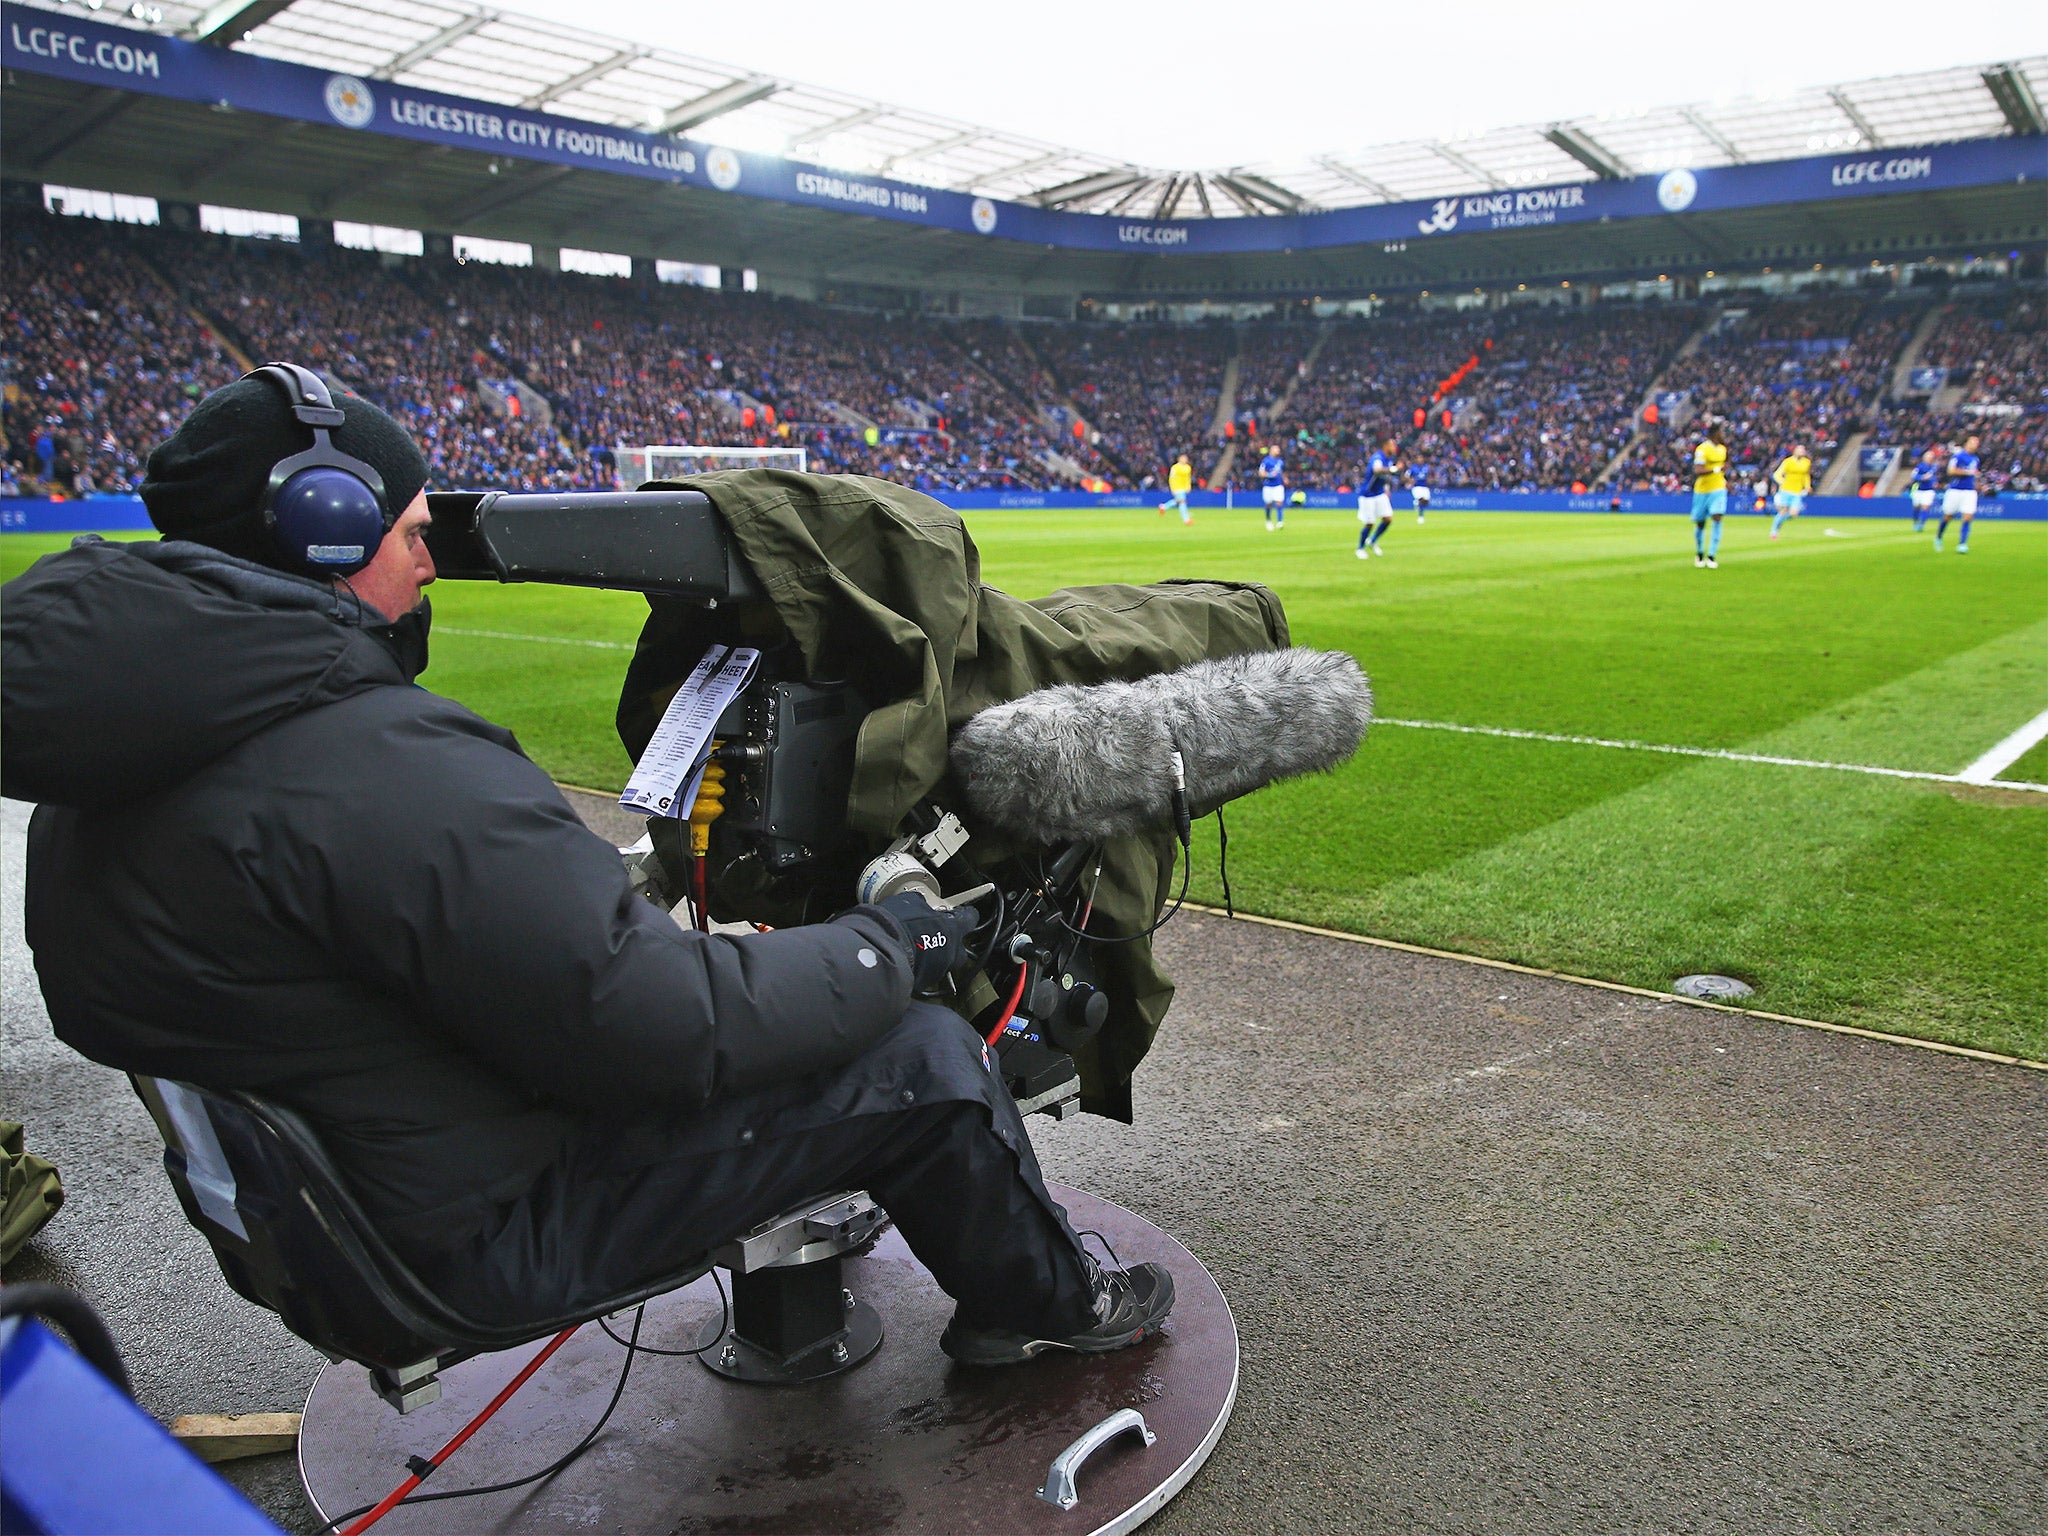 BT has used sport to bolster its position in the pay TV sector